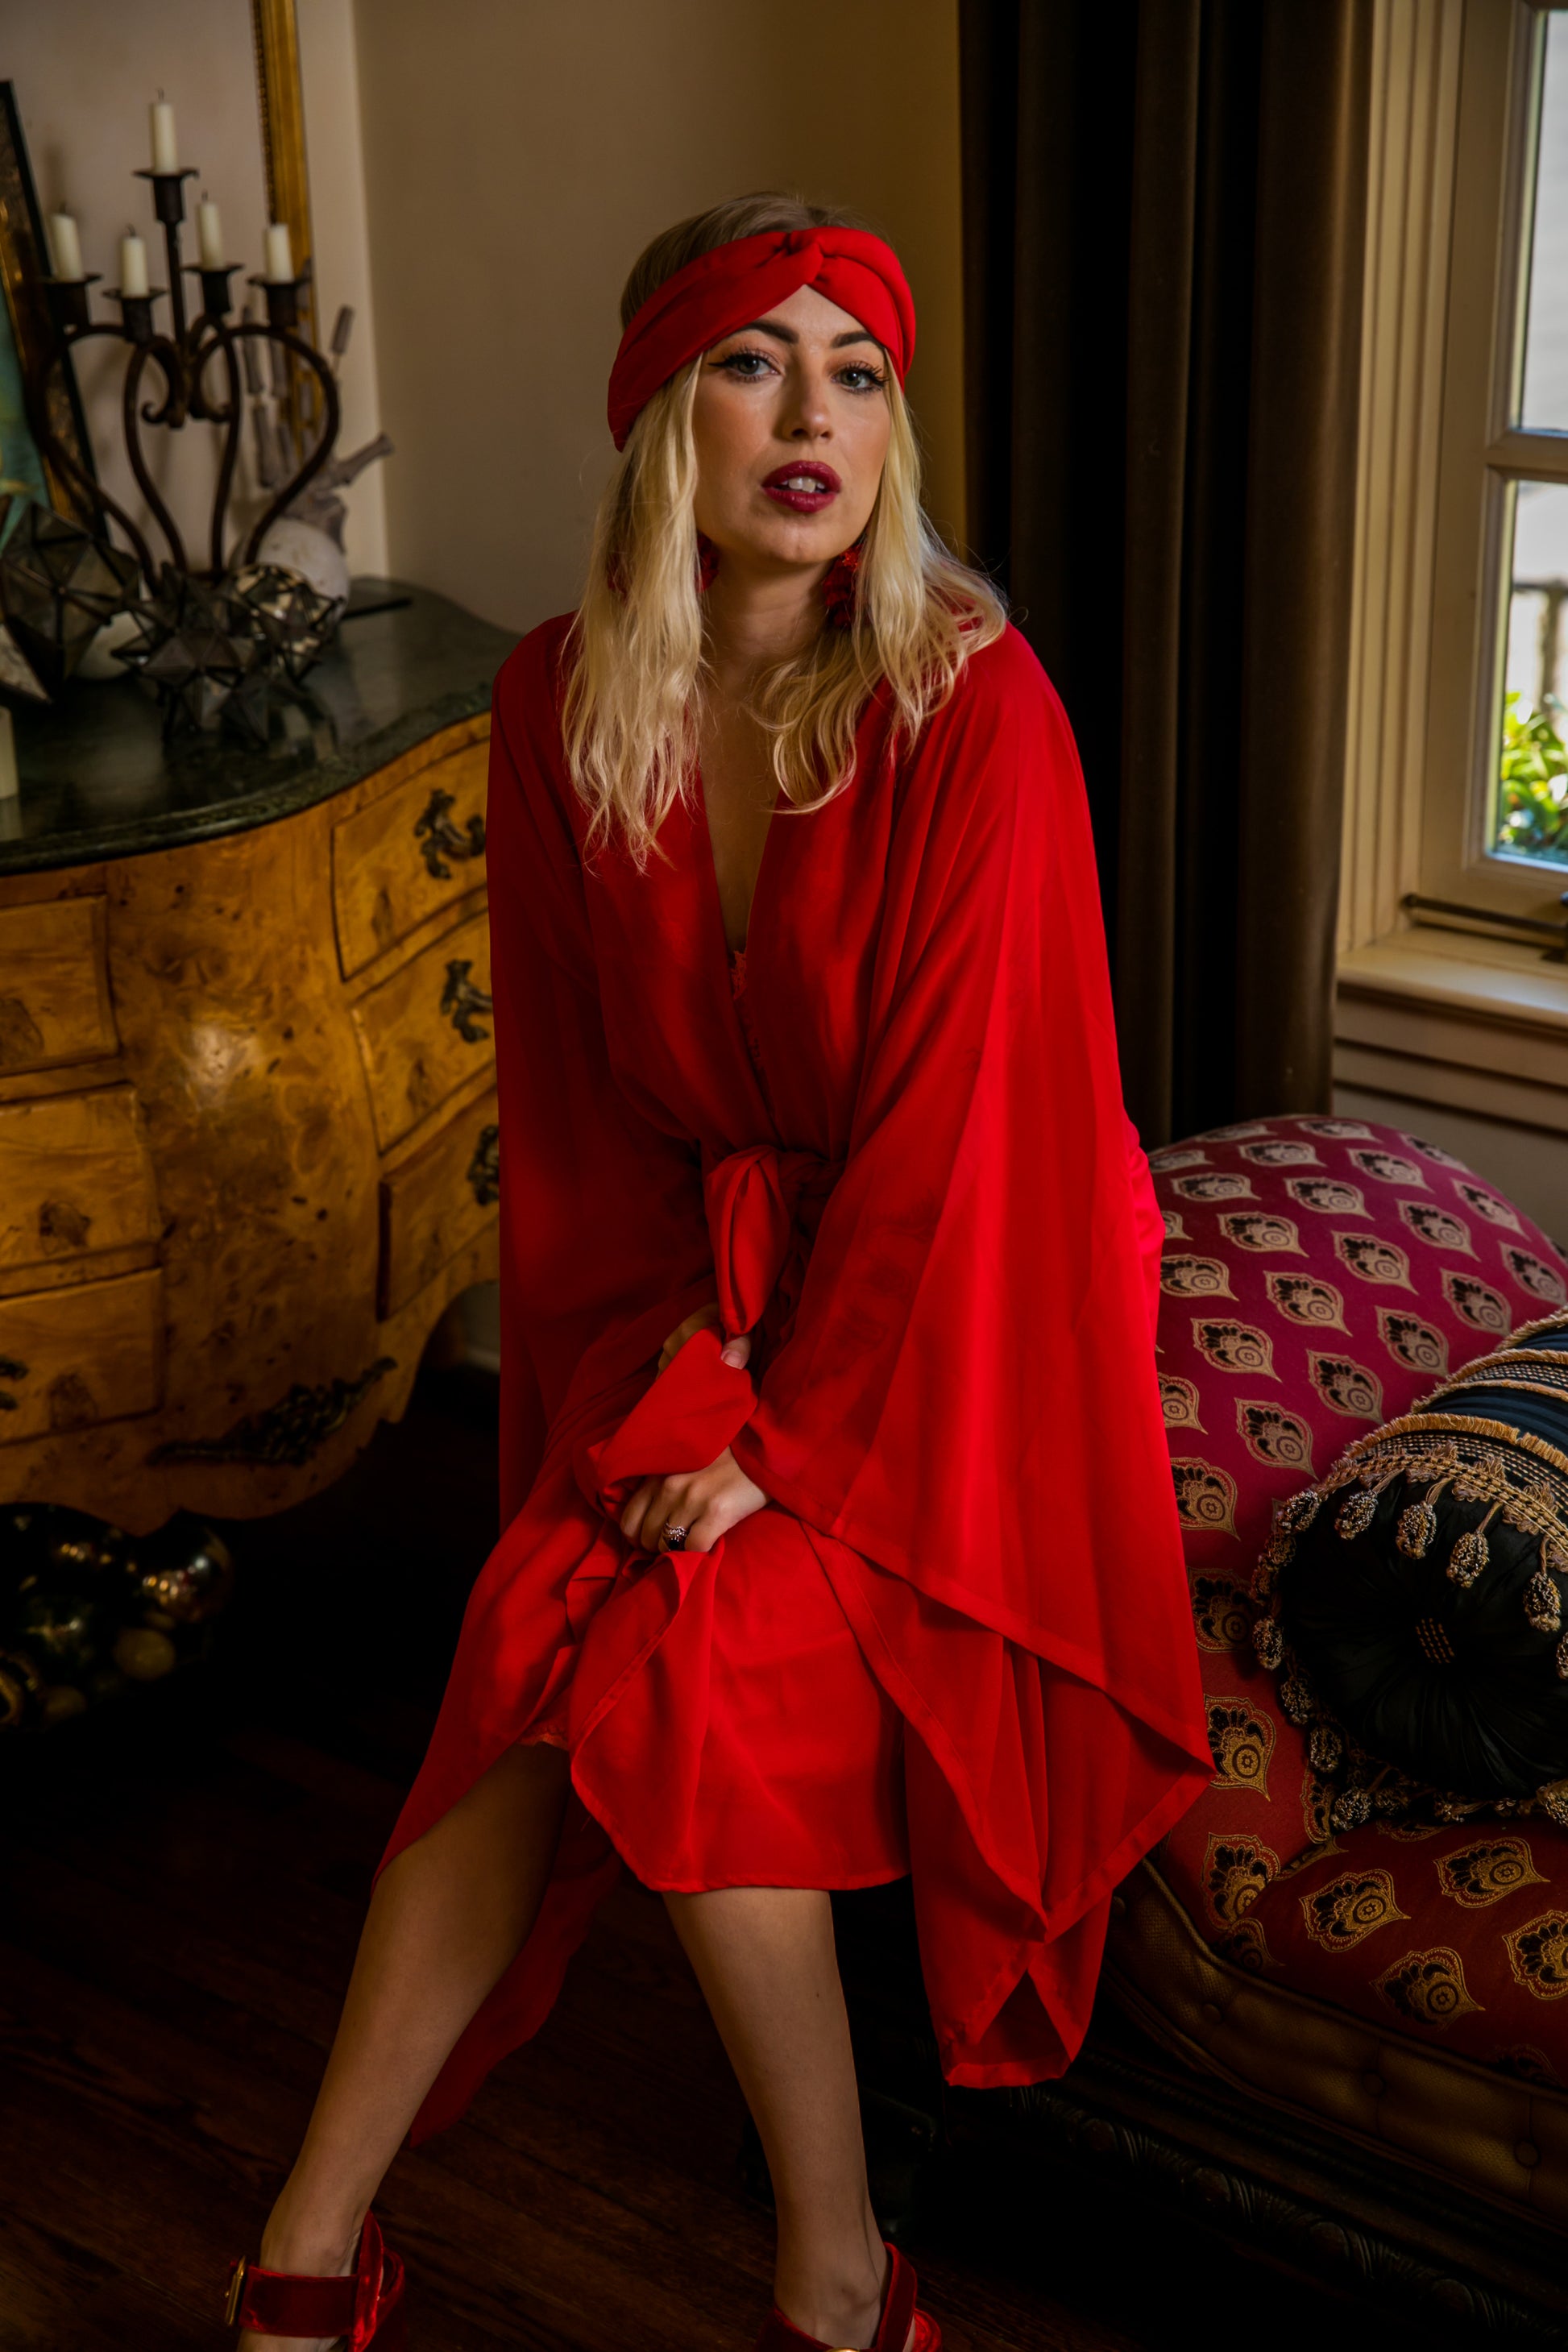 jennafer grace Truly Yours kimono scarlet crimson blood red cherry red gothic pinup vintage inspired coverup wrap dress with pockets duster jacket robe goth boho pinup bohemian hippie whimsical romantic beach poolside resort cabana lounge wear unisex handmade in California USA